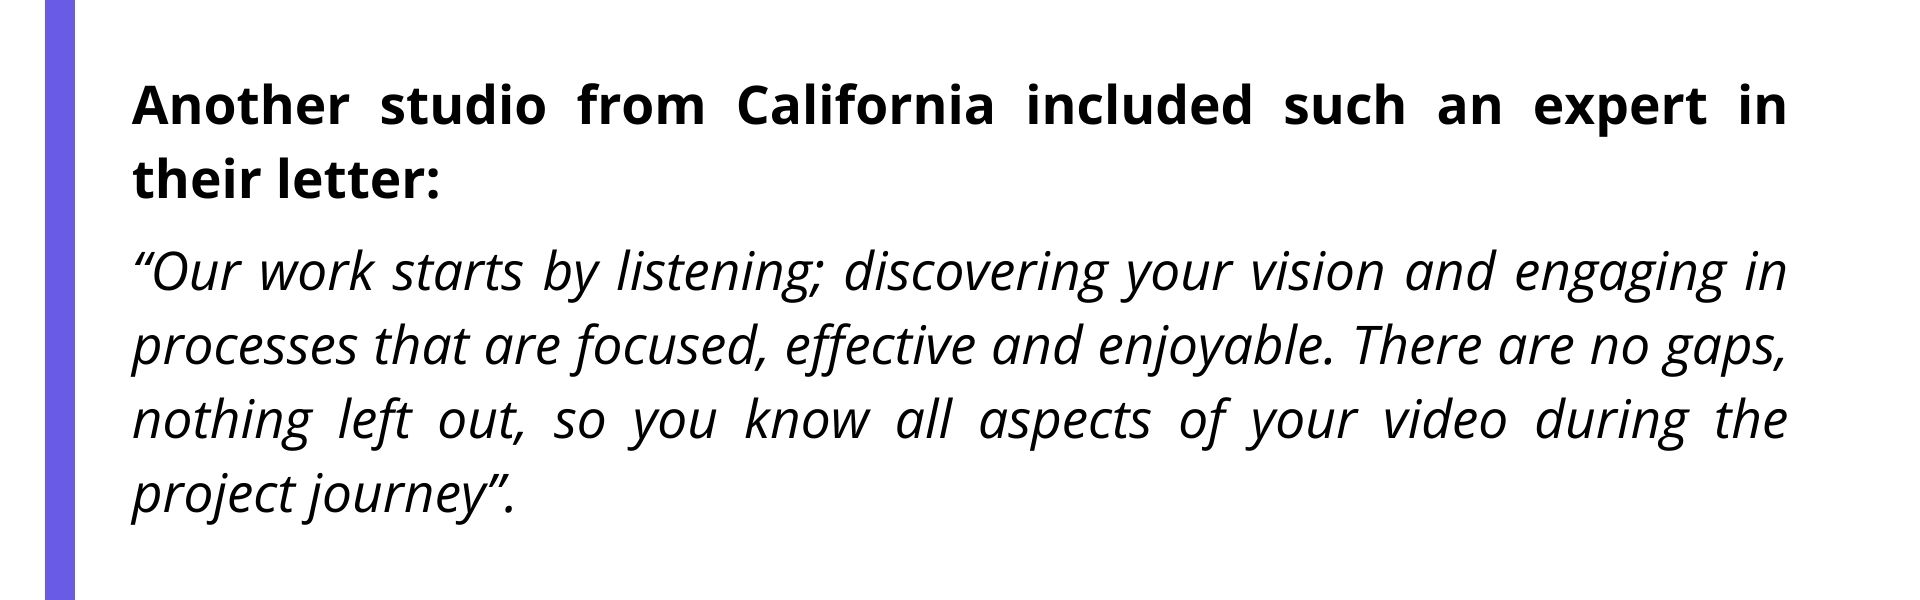 Another studio from California included such an expert in their letter: “Our work starts by listening; discovering your vision and engaging in processes that are focused, effective and enjoyable. There are no gaps, nothing left out, so you know all aspects of your video during the project journey”.